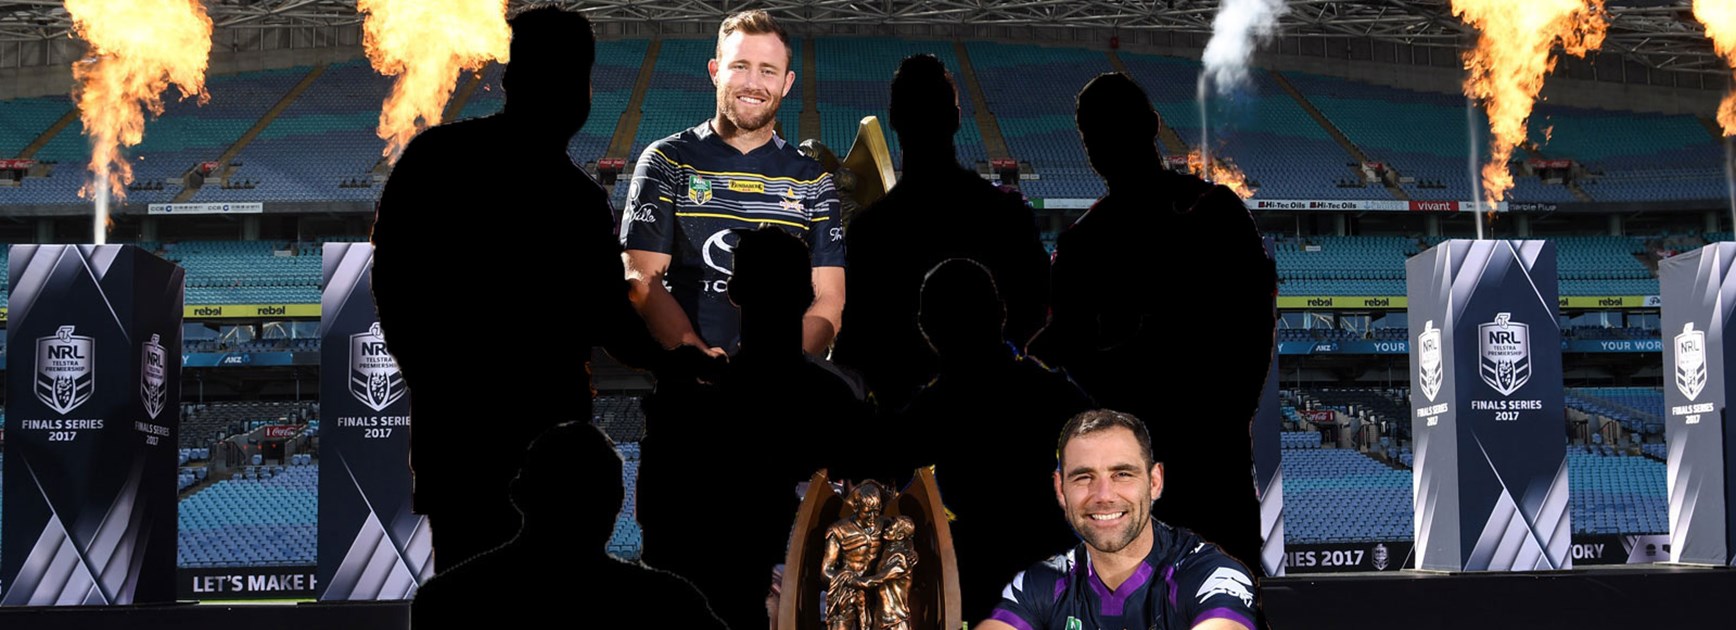 And then there were two... the last remaining finals captains Gavin Cooper and Cameron Smith.